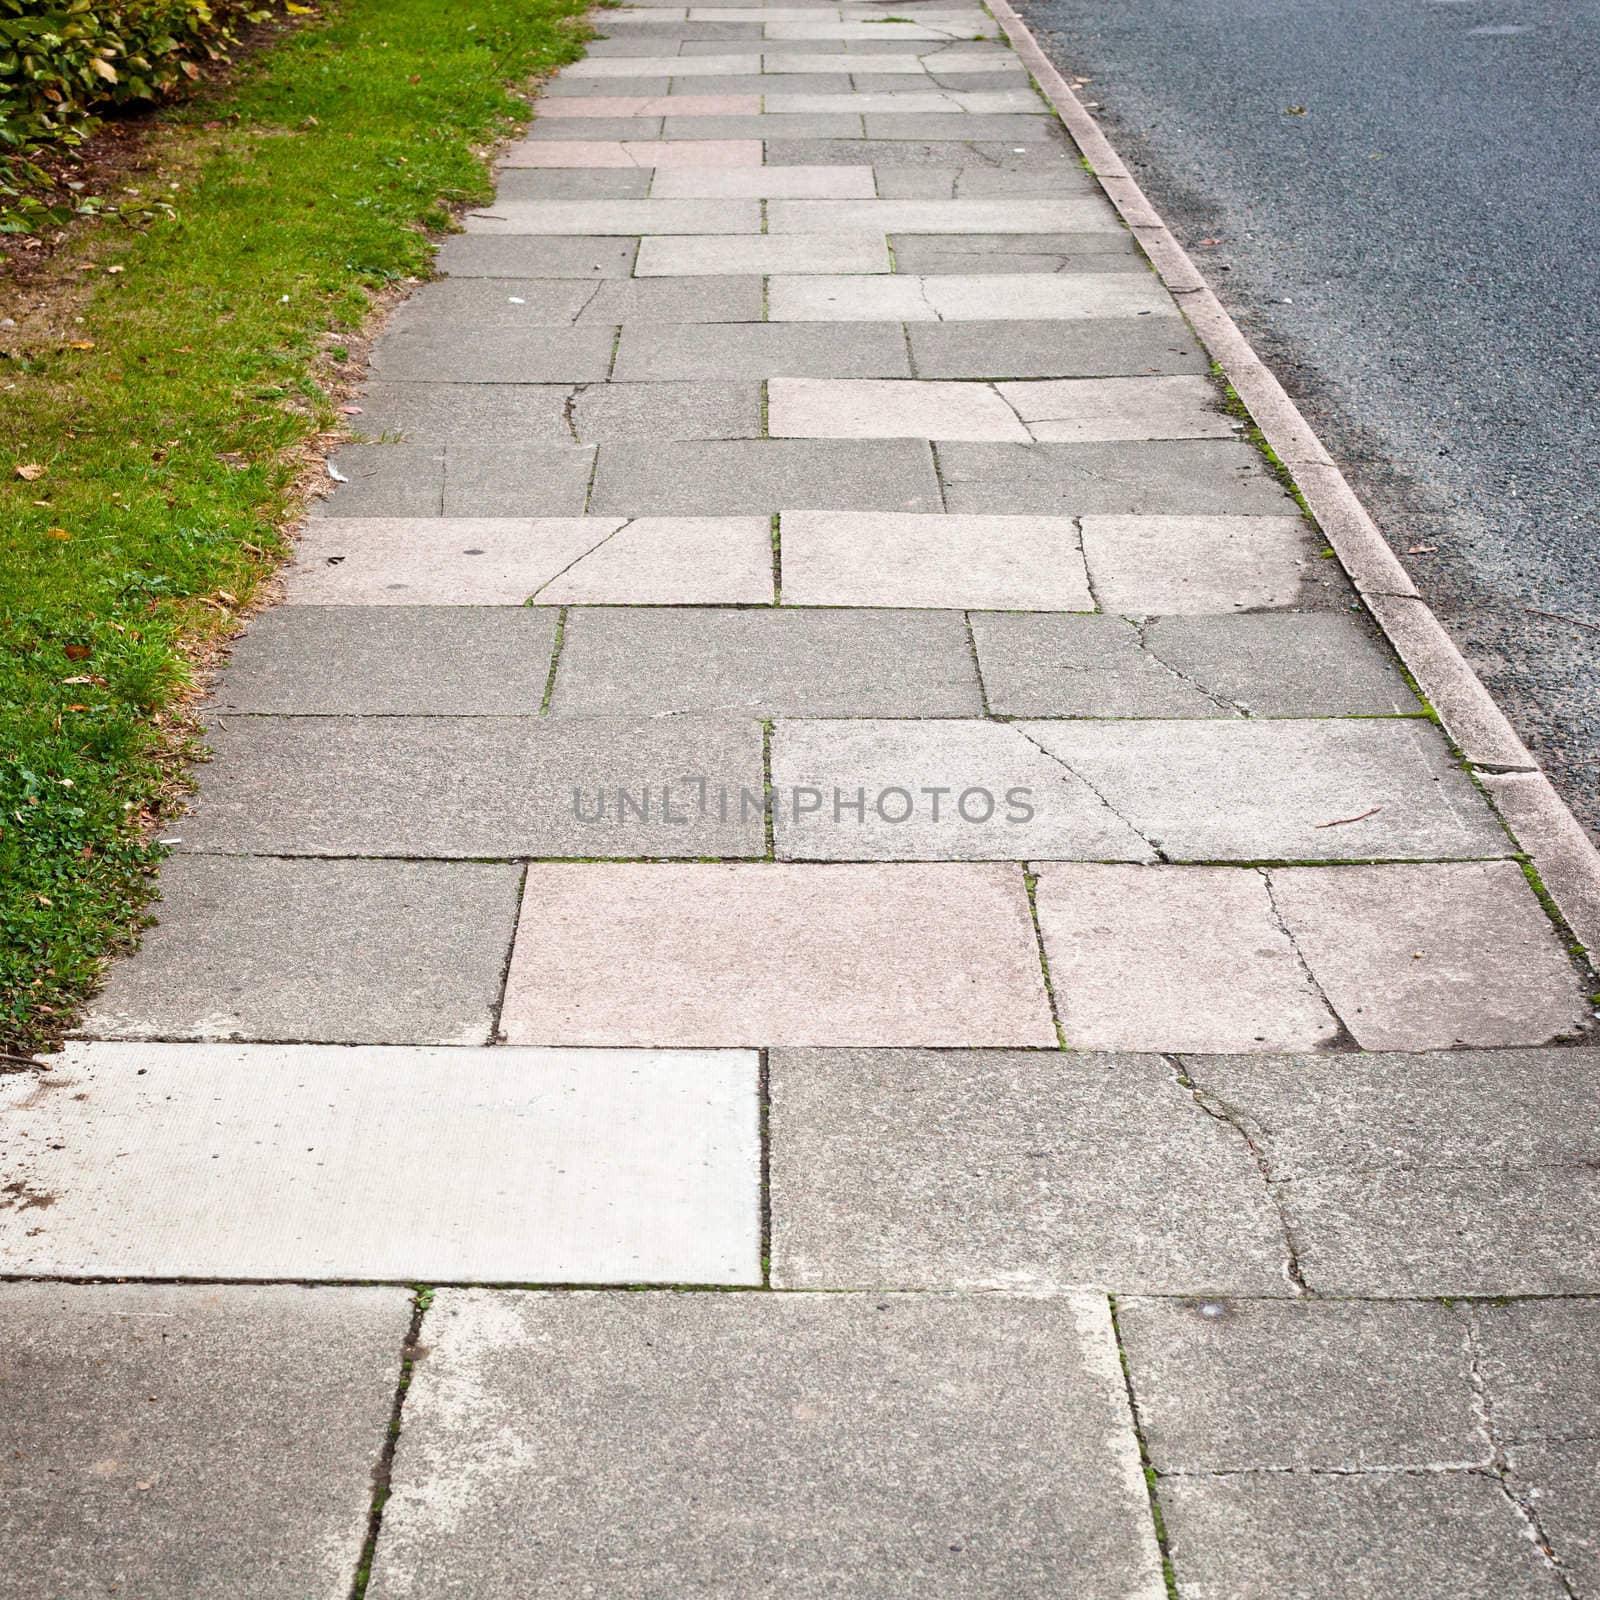 Details of a sidewalk between a road and a green grass verge